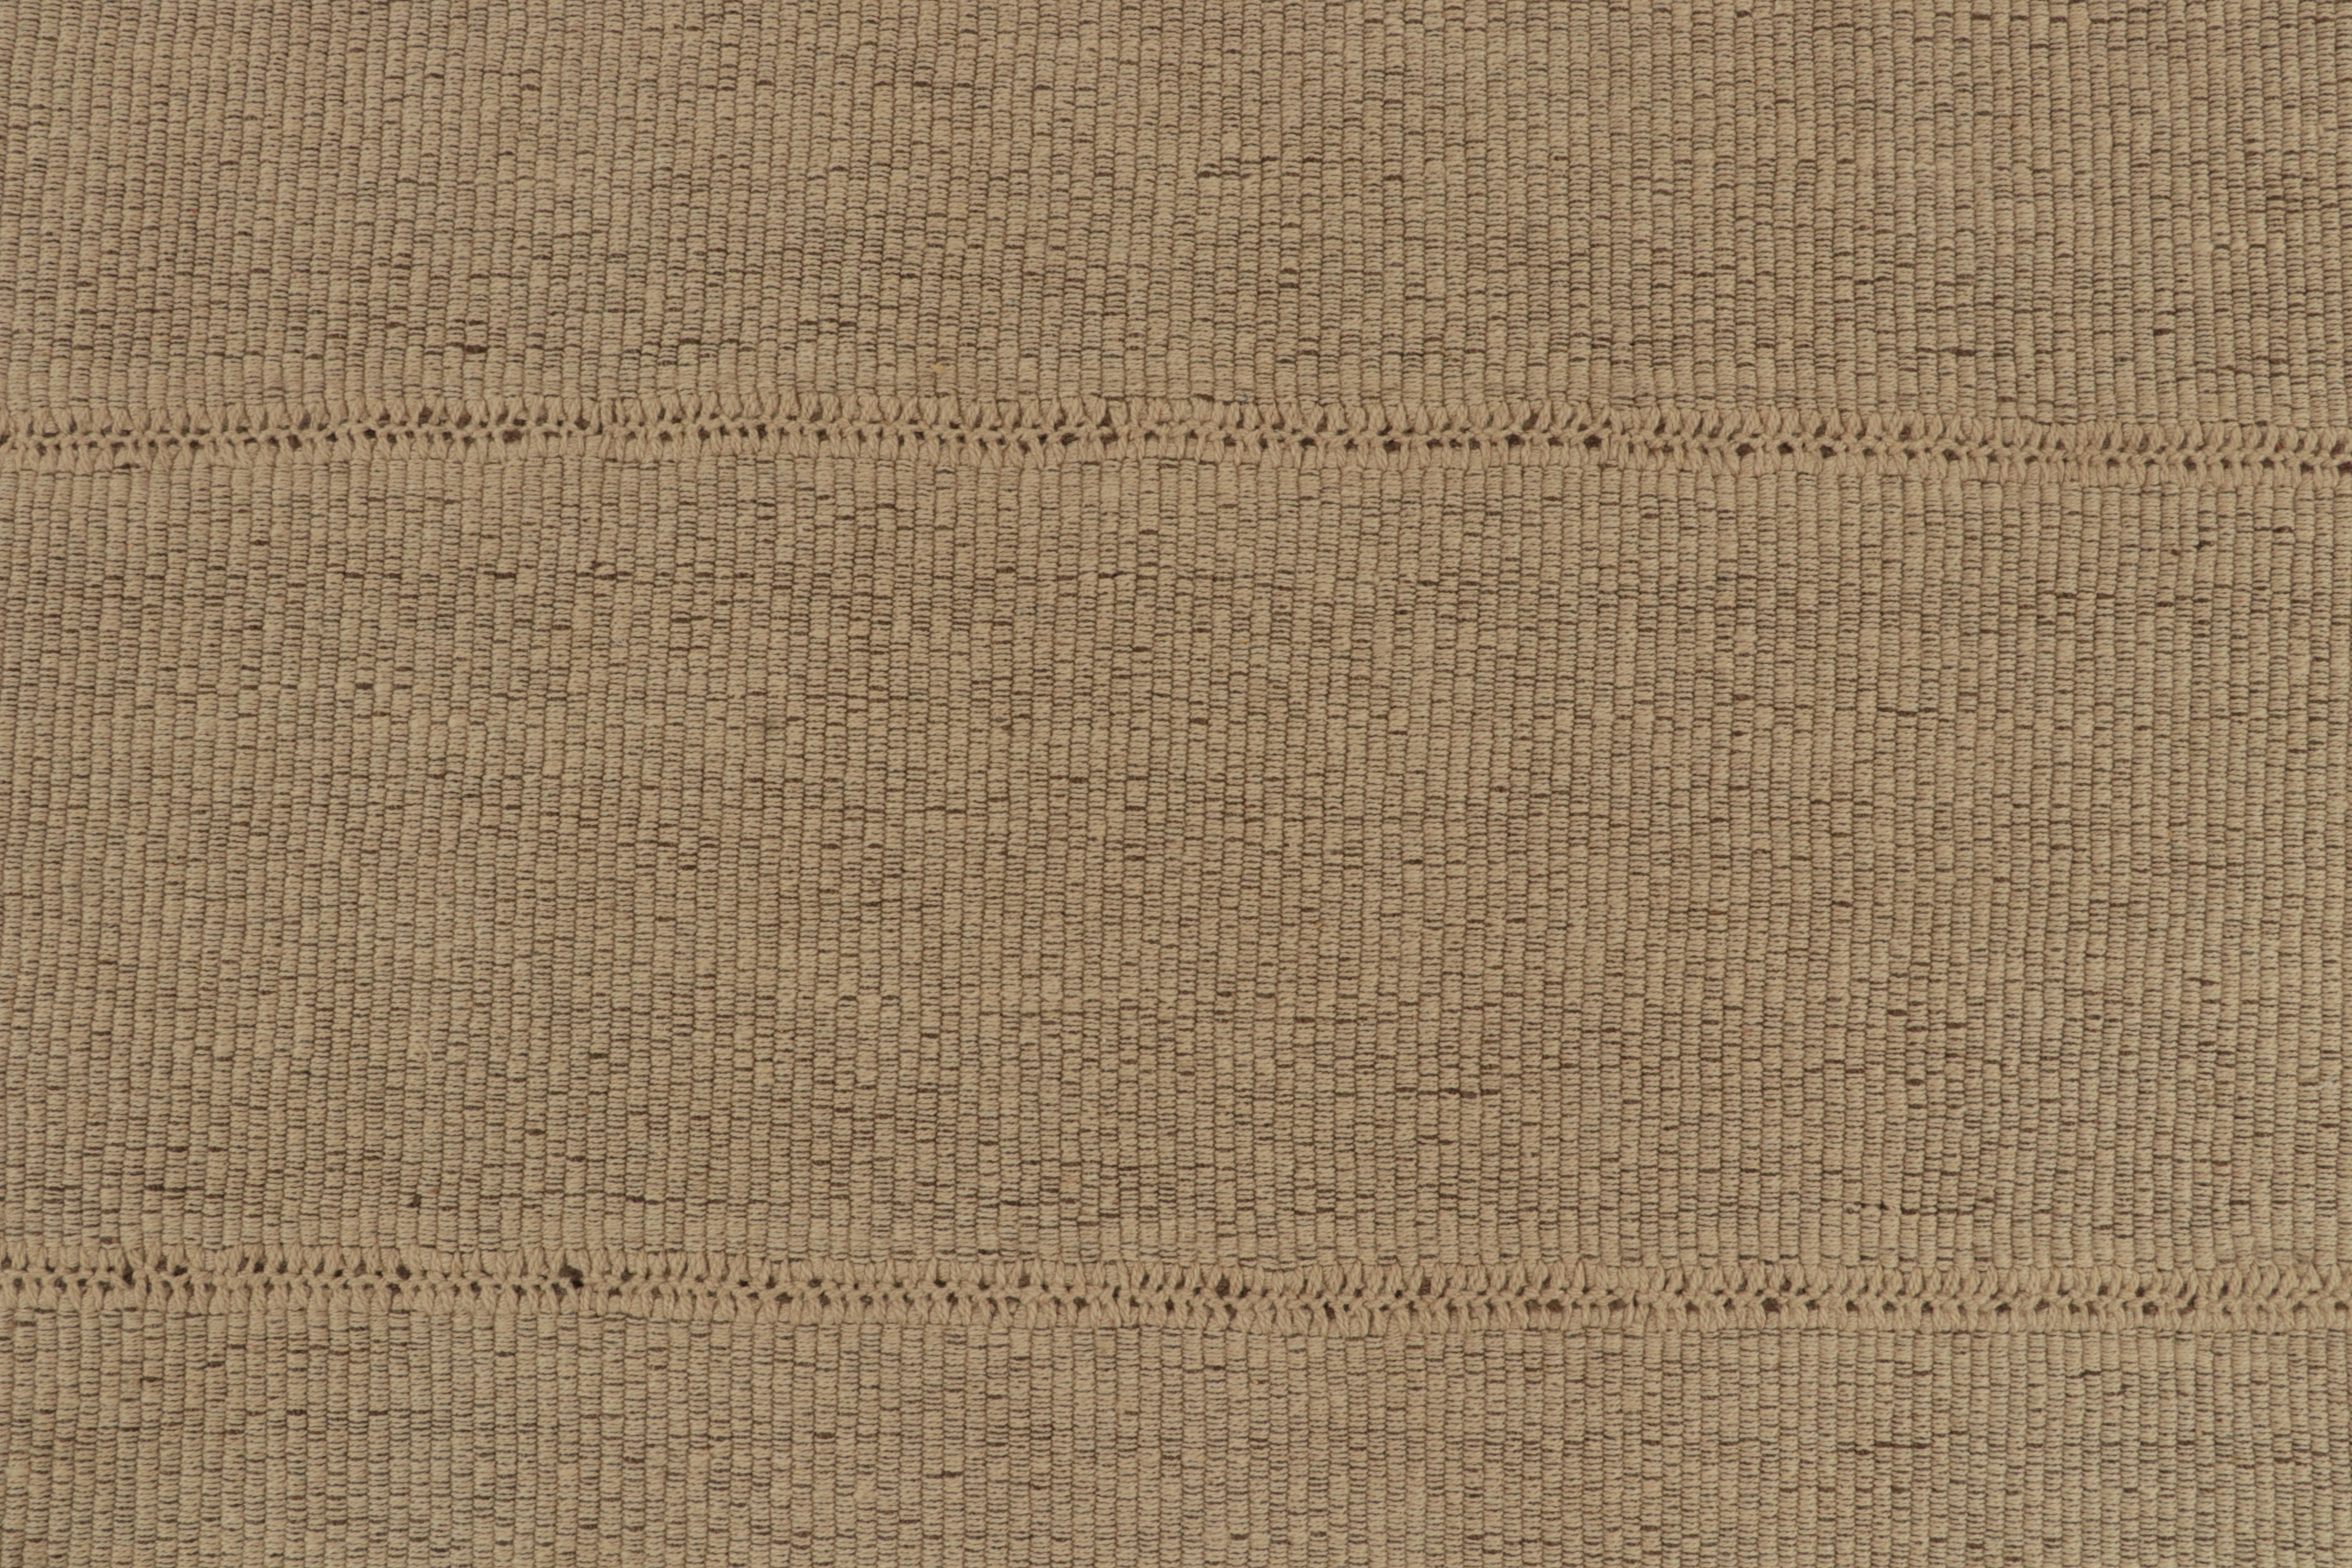 Wool Rug & Kilim’s Contemporary Kilim in Solid, Sandy Beige-Brown Panel Woven Style For Sale